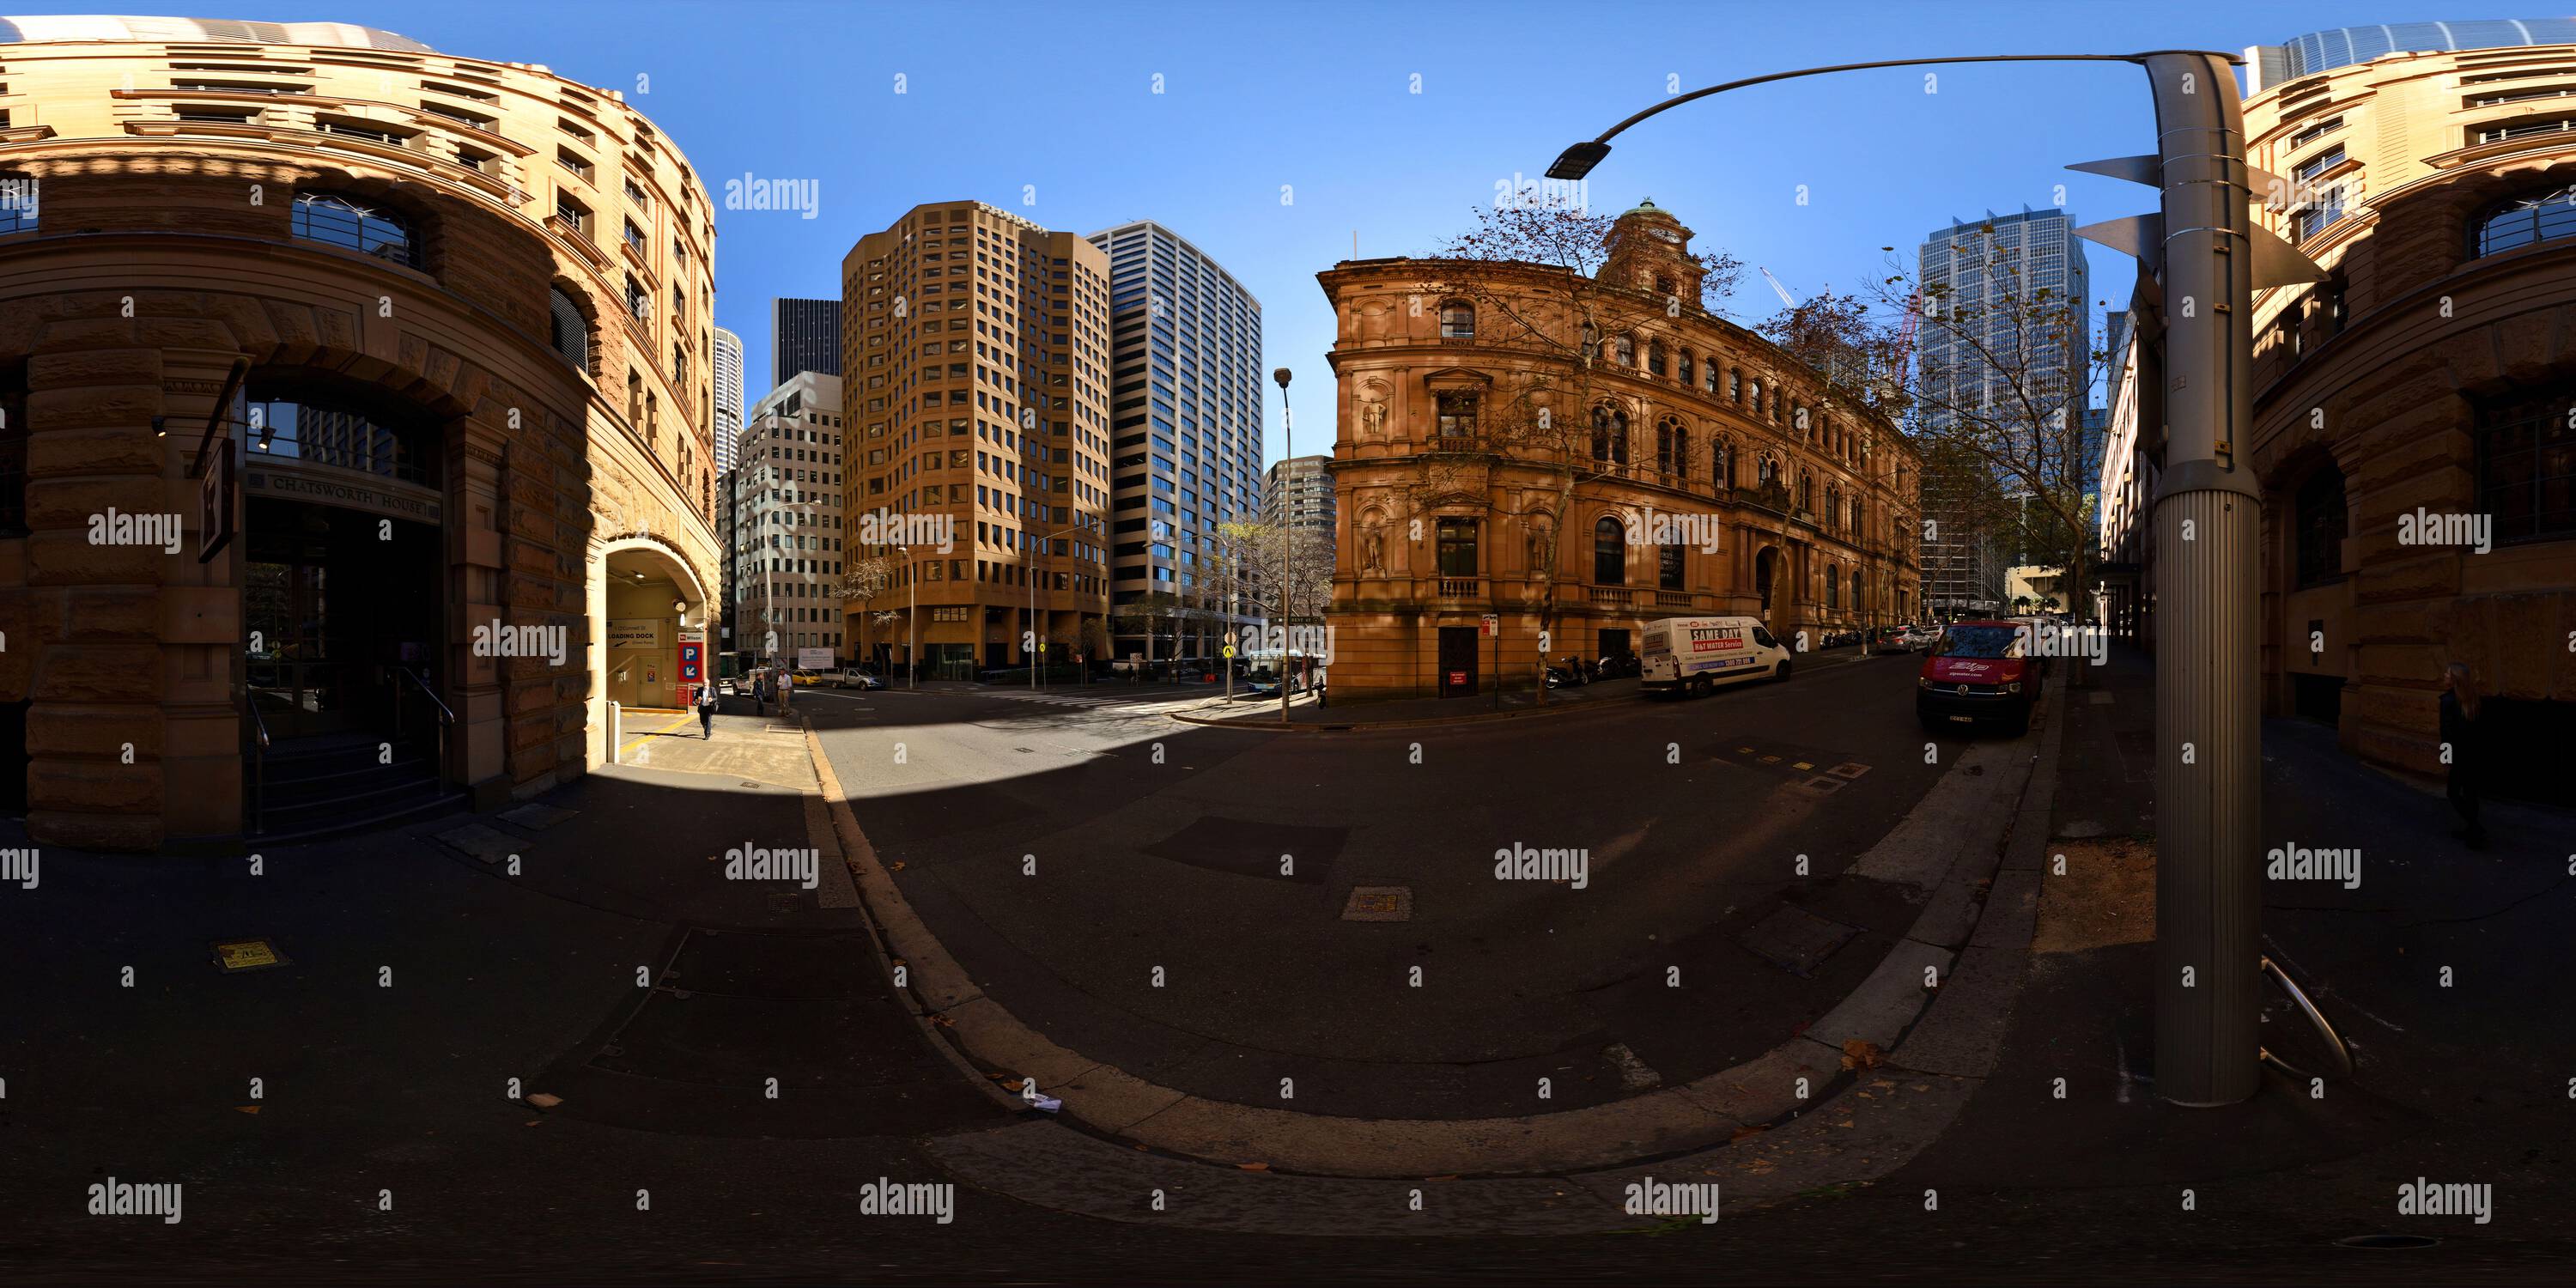 360 degree panoramic view of 360° panorama of the Victorian Renaissance Revival, Department of Lands building City CBD, from Bent Street near Gresham st, Sydney, Australia